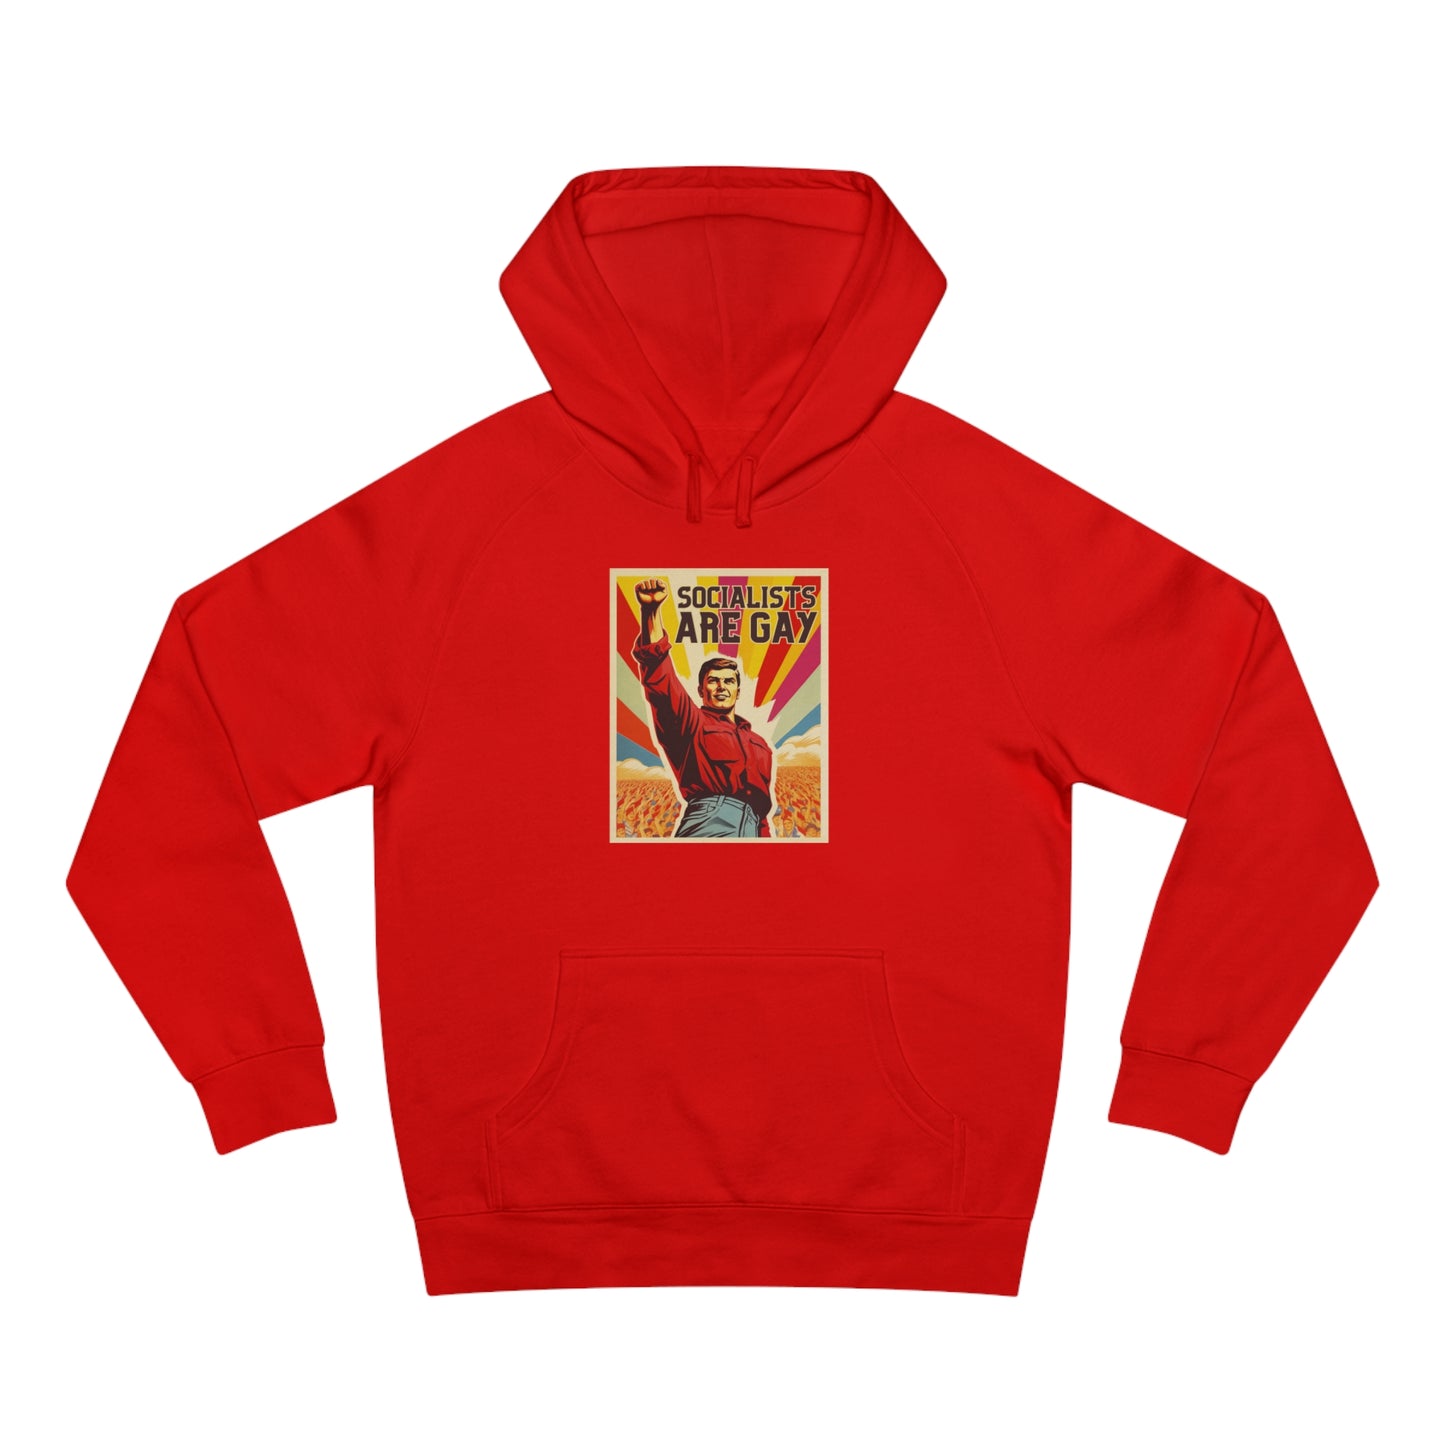 Socialists Are Gay Unisex Supply Hoodie